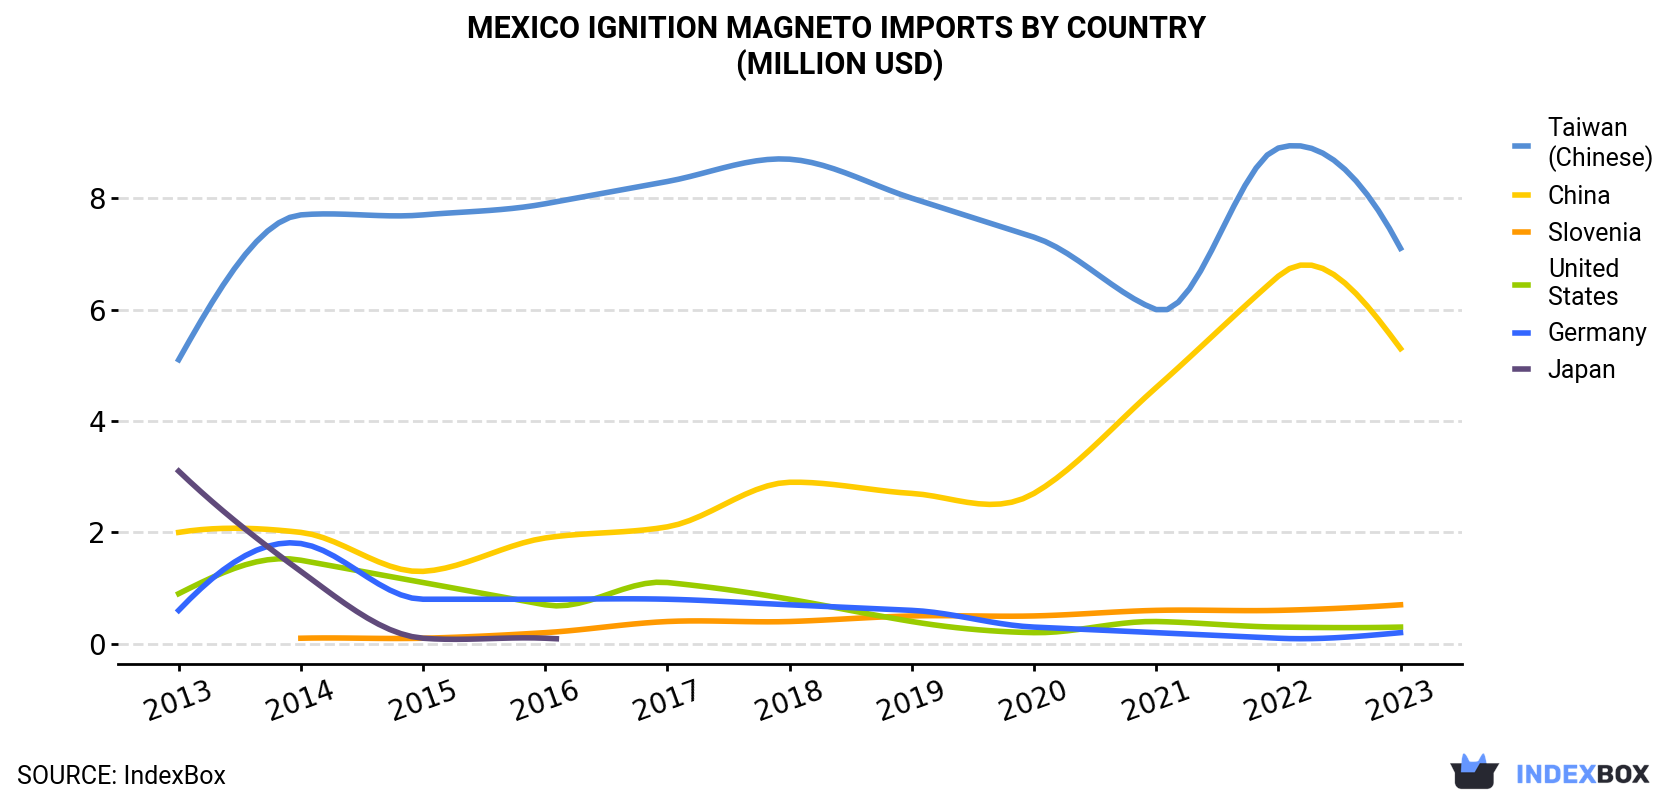 Mexico Ignition Magneto Imports By Country (Million USD)